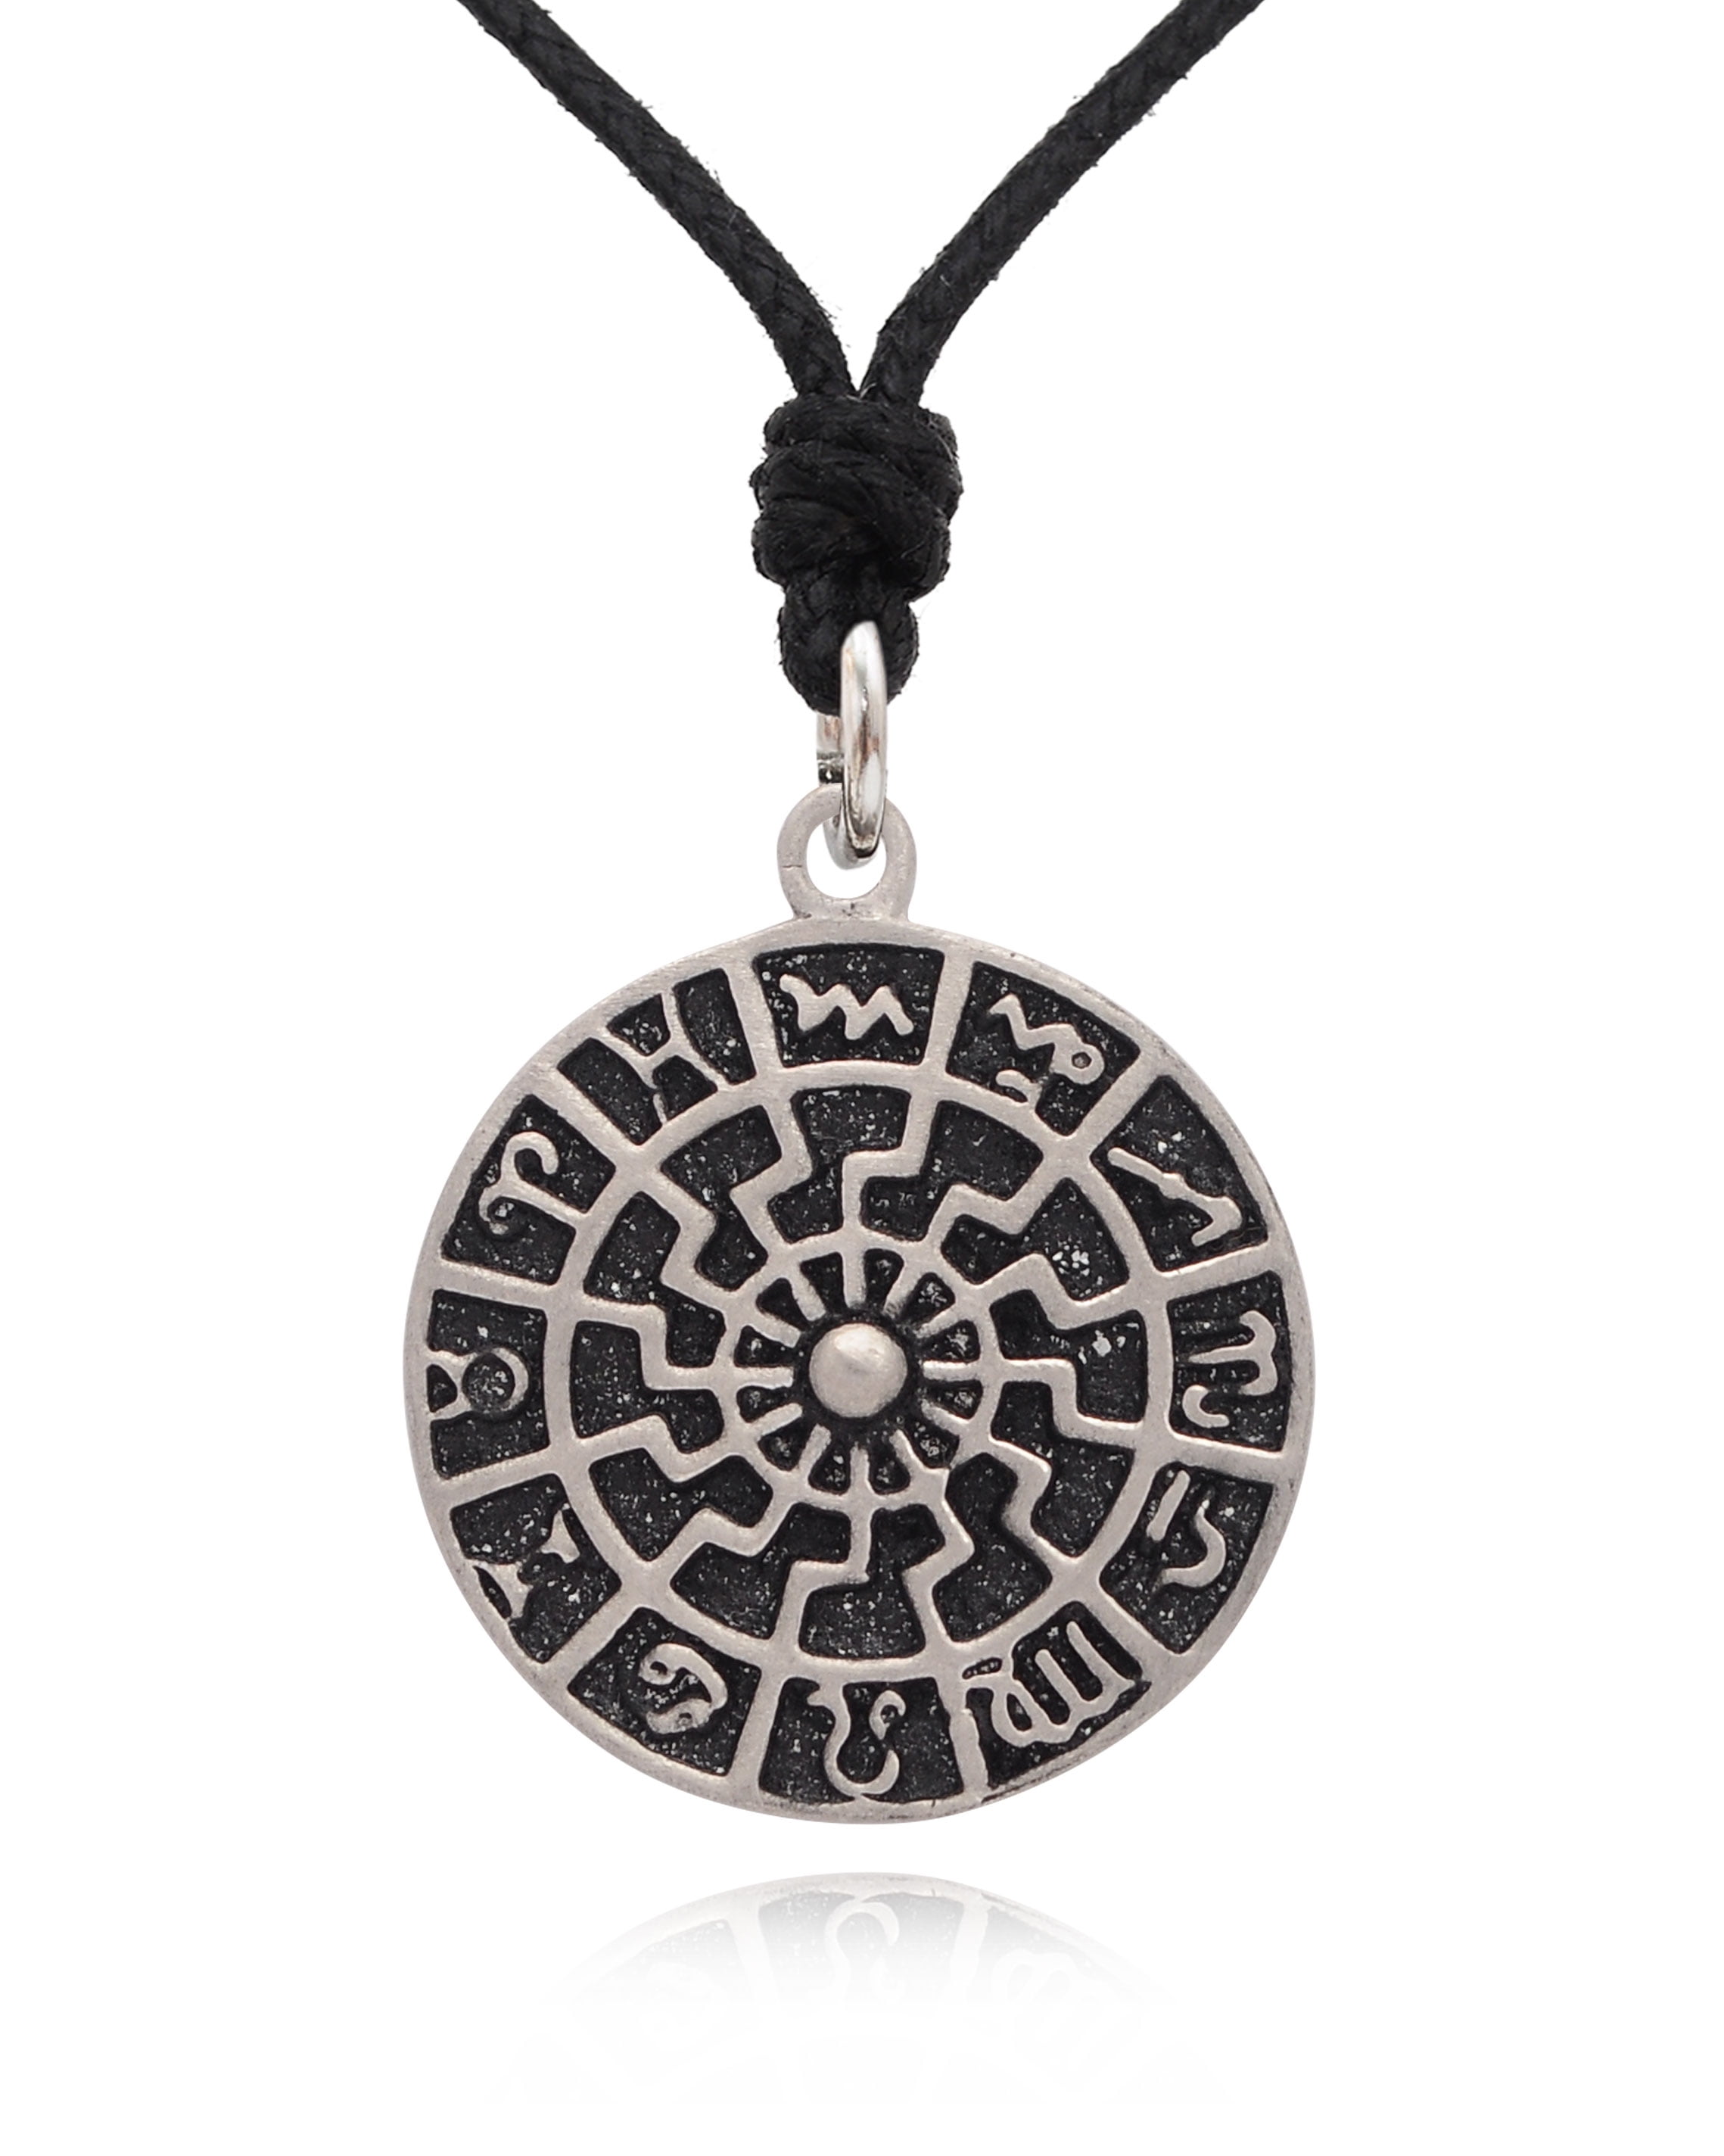 Astrology Silver Pewter Charm Necklace Pendant Jewelry 